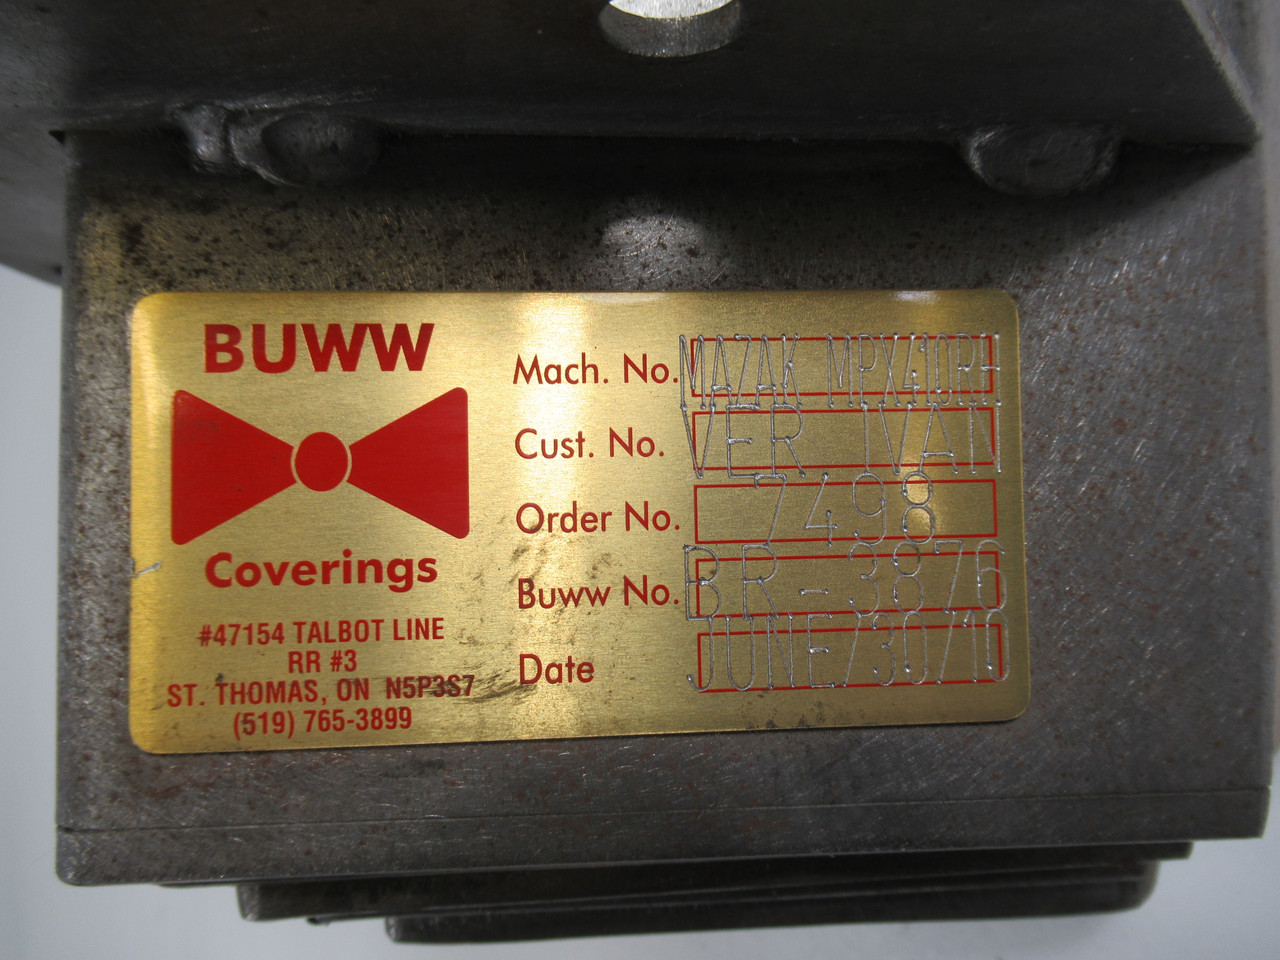 Buww Coverings BR-3876 Way Cover 18-69cm USED